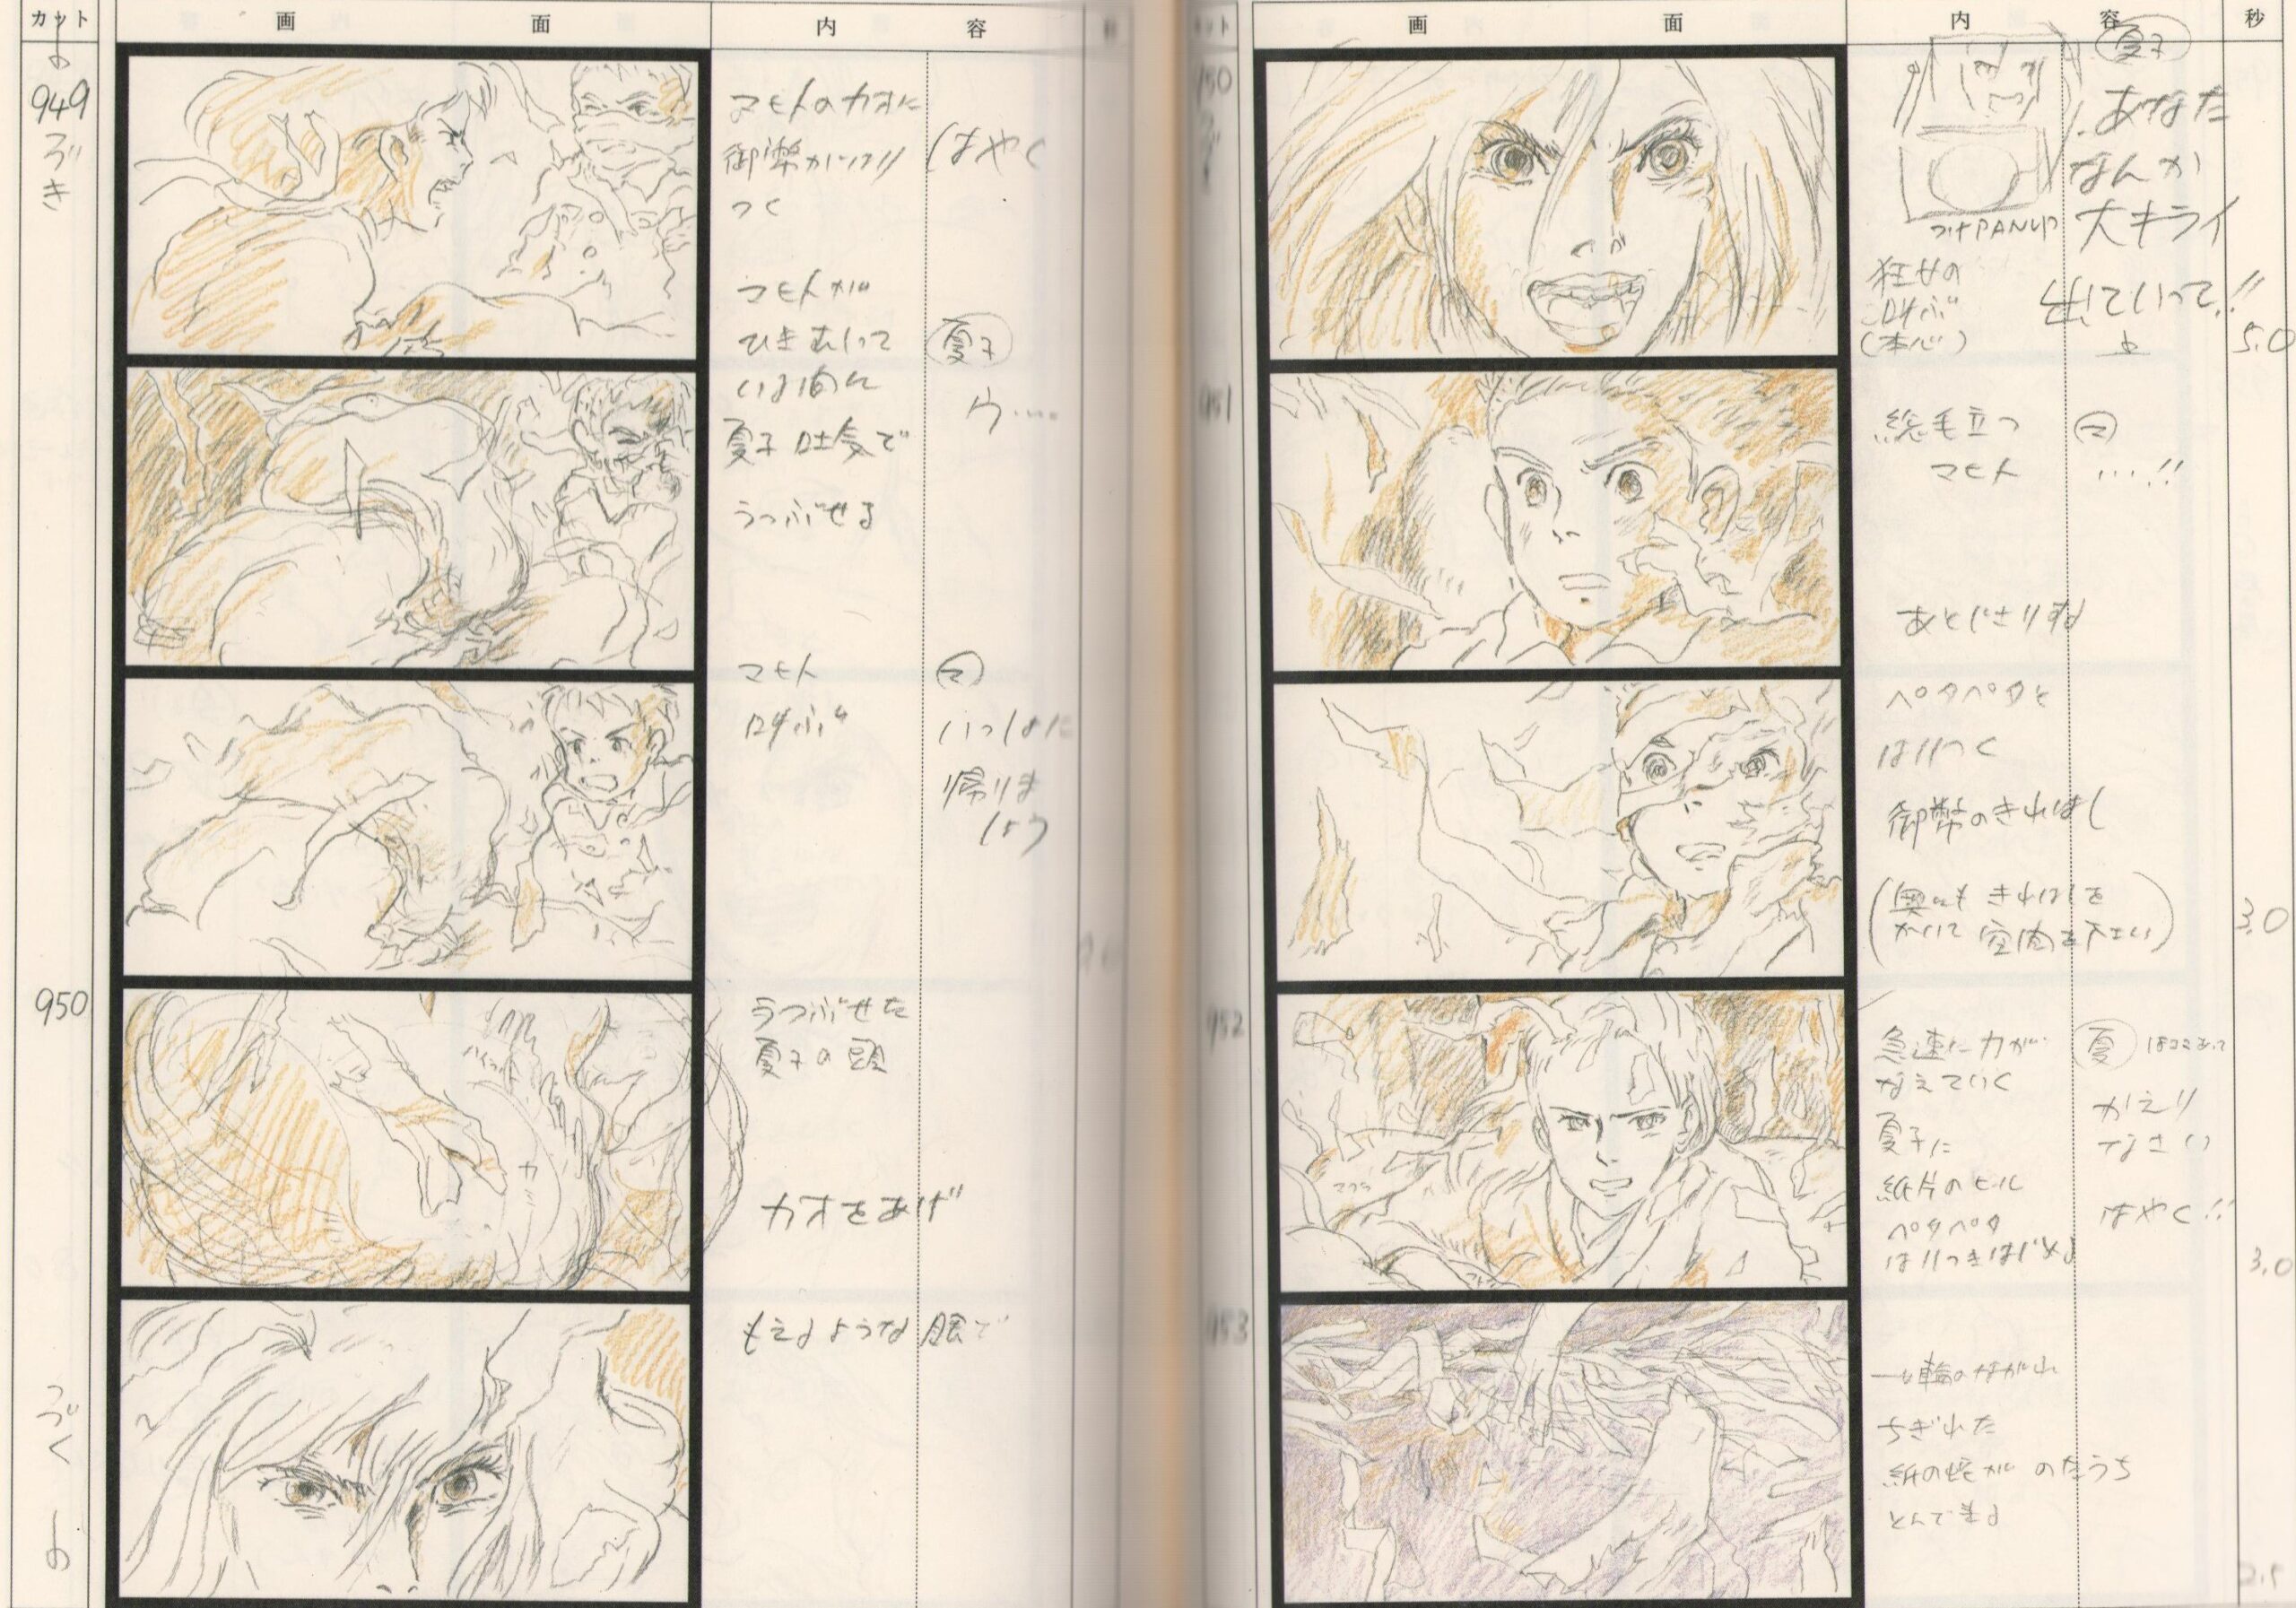 Hayao Miyazaki's storyboards for The Boy and the Heron, the scene in the labor room when Natsuko is giving birth.